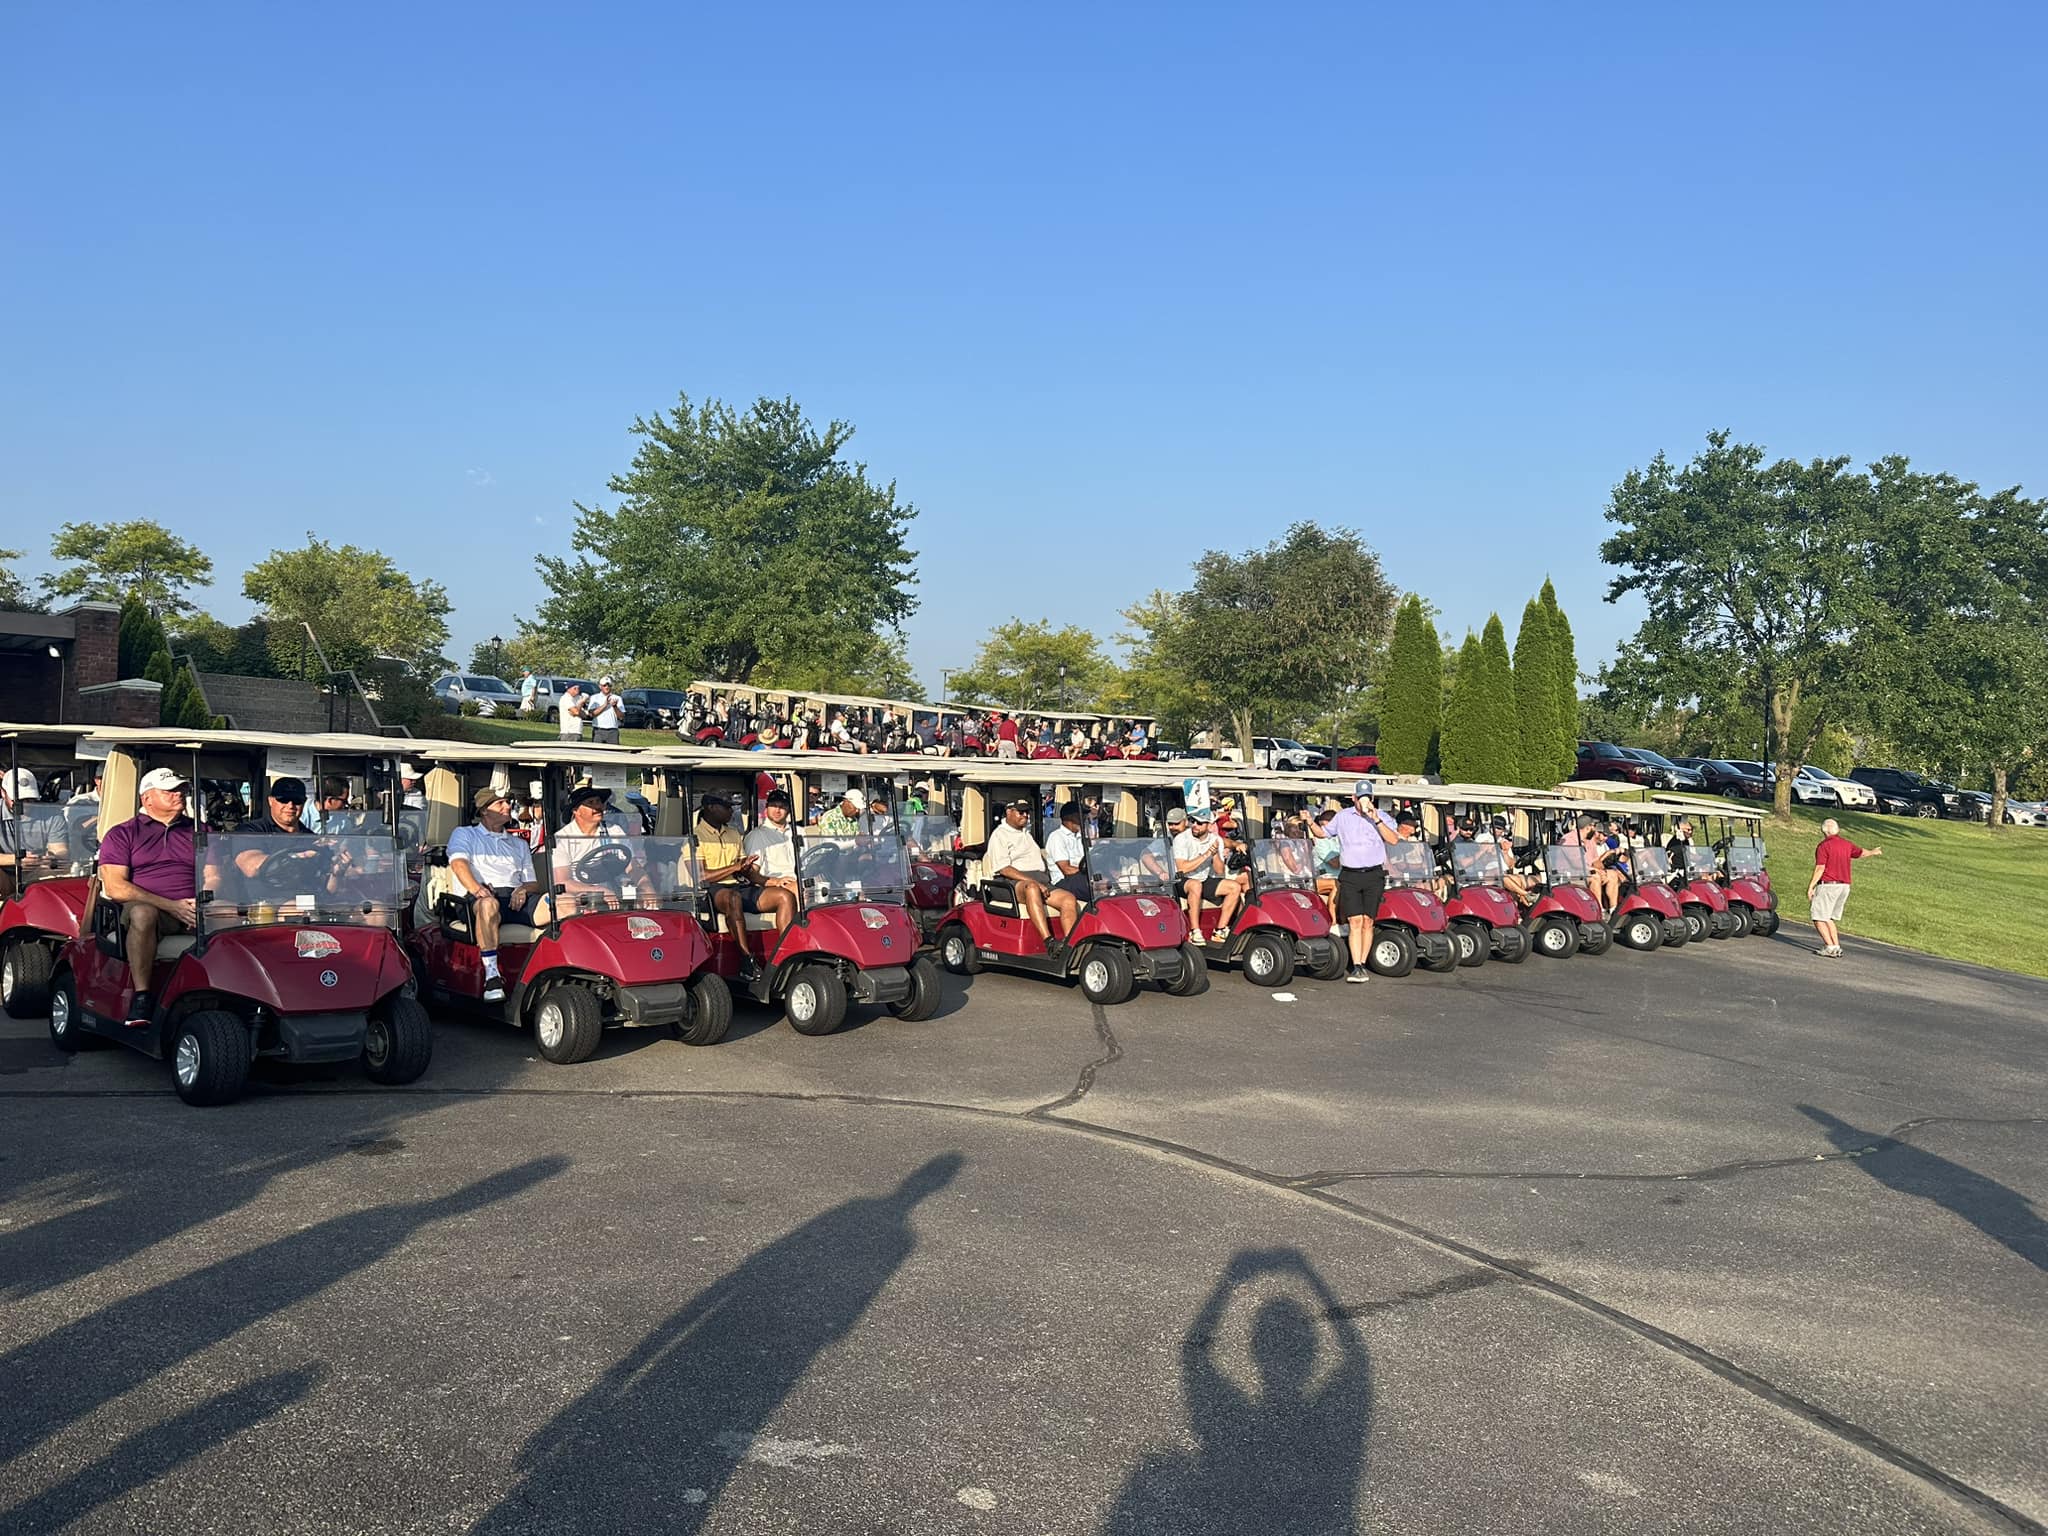 Rows of golf carts lined up ready to go out on the course.